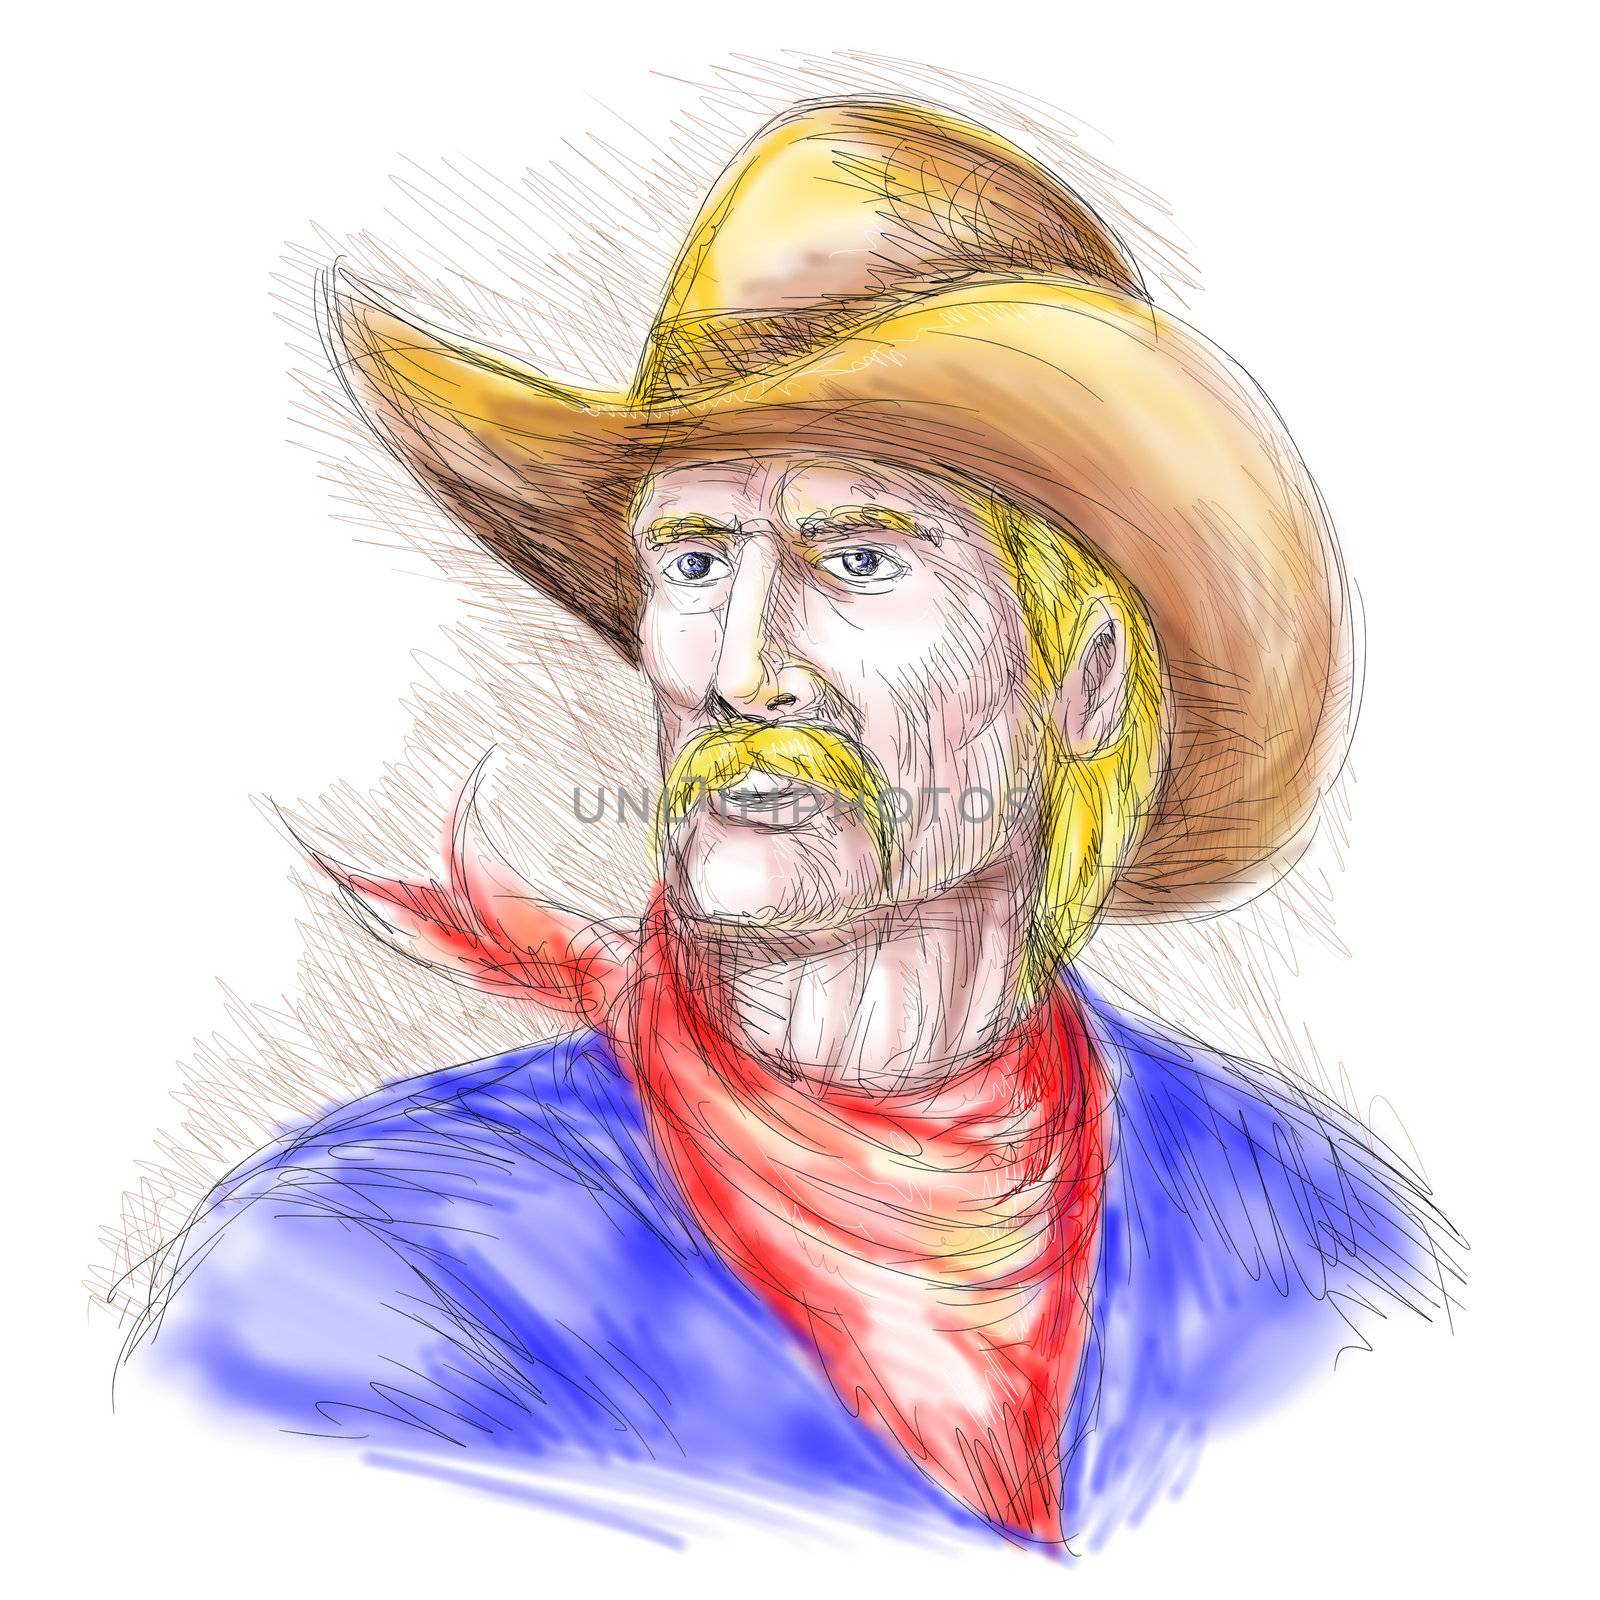 hand sketched illustration of an American Cowboy